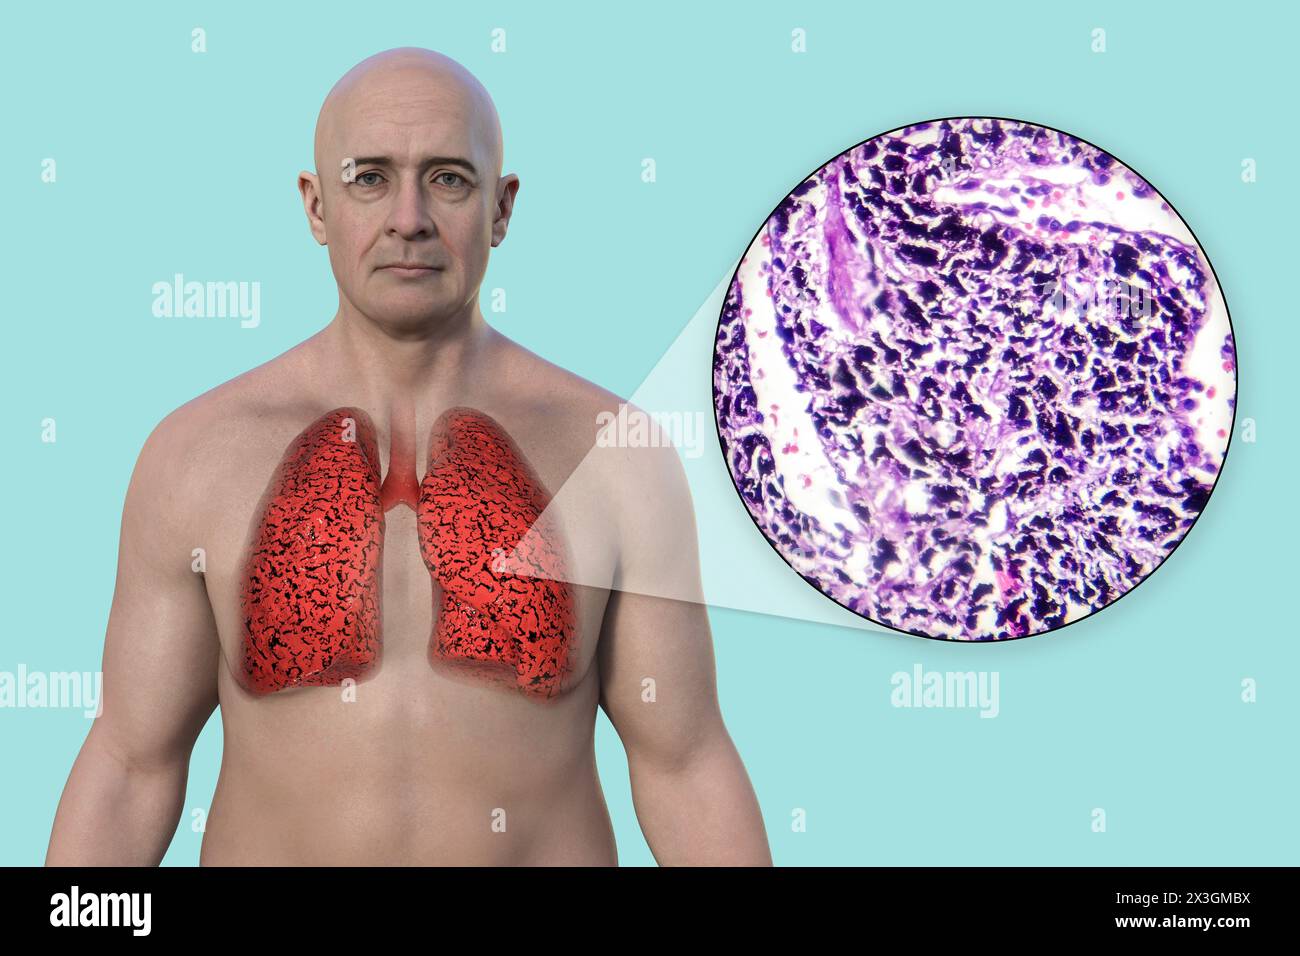 Illustration of a man with smoker's lungs, along with a micrograph image of lungs affected by smoking. Stock Photo